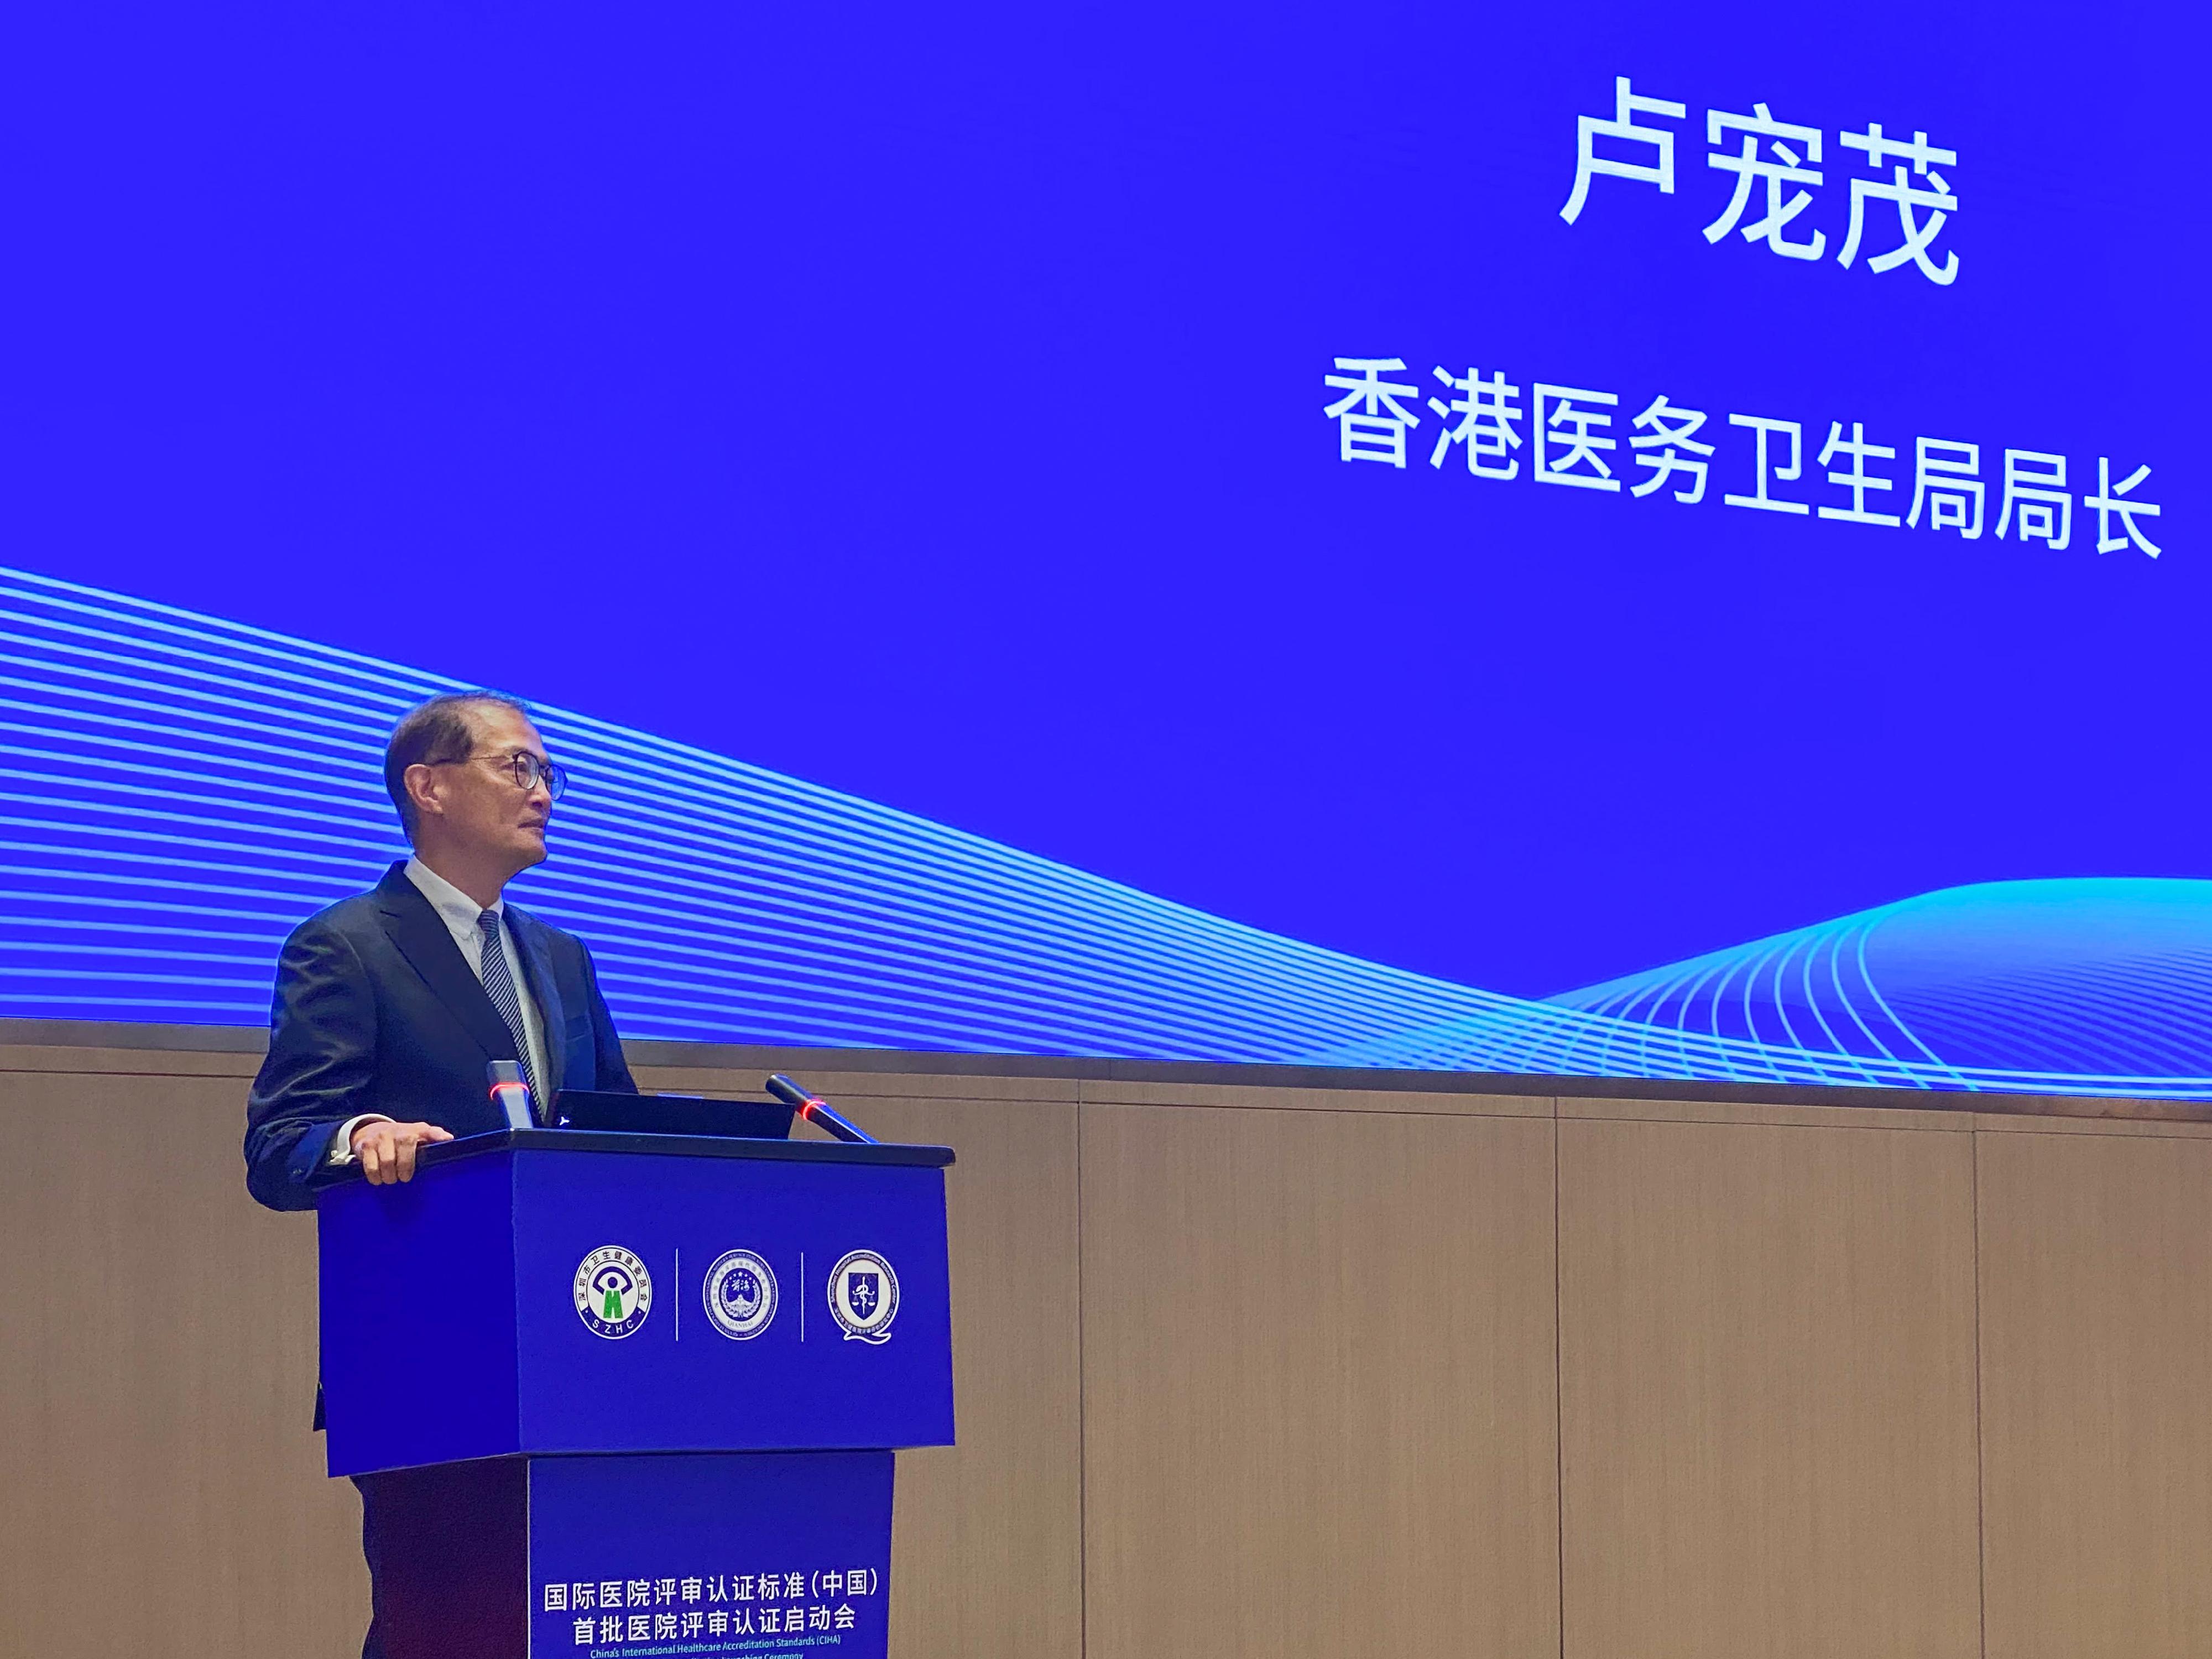 The Secretary for Health, Professor Lo Chung-mau, and his delegation joined the China's International Healthcare Accreditation Standards Hospital Accreditation Launching Ceremony today (March 30). Photo shows Professor Lo delivering a speech at the Launching Ceremony.
